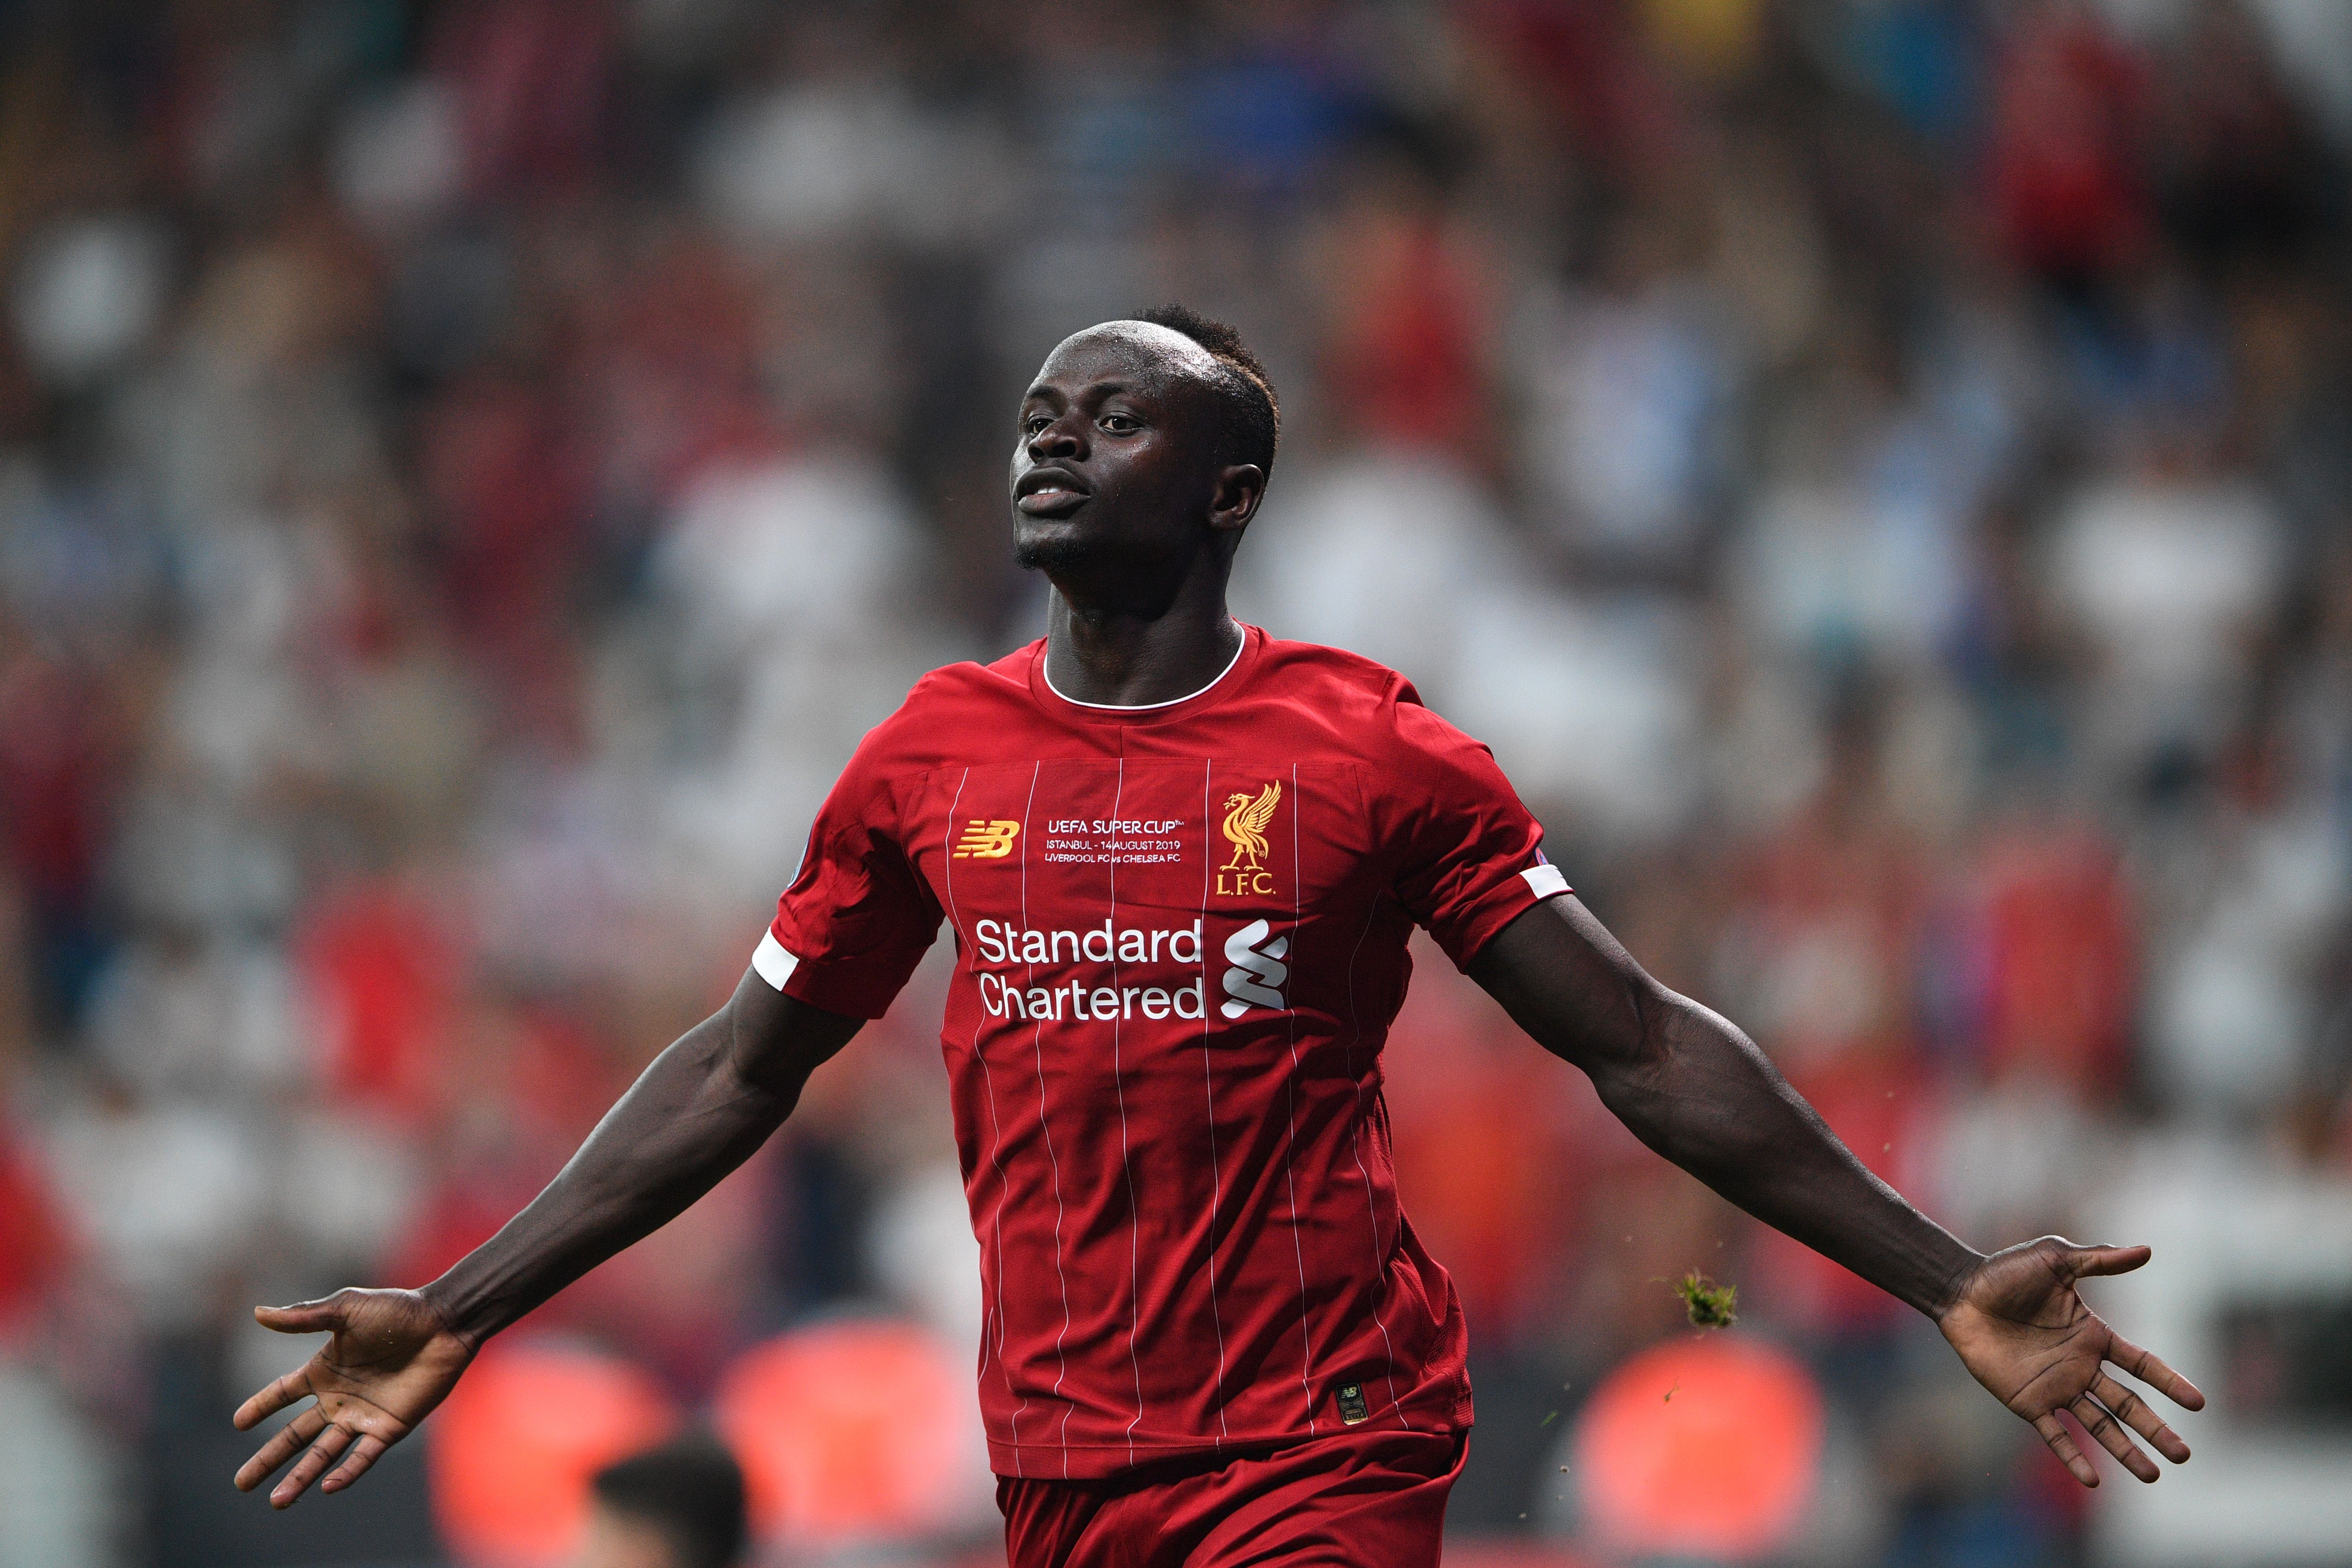 New season, same old Mane (Photo by BULENT KILIC/AFP/Getty Images)